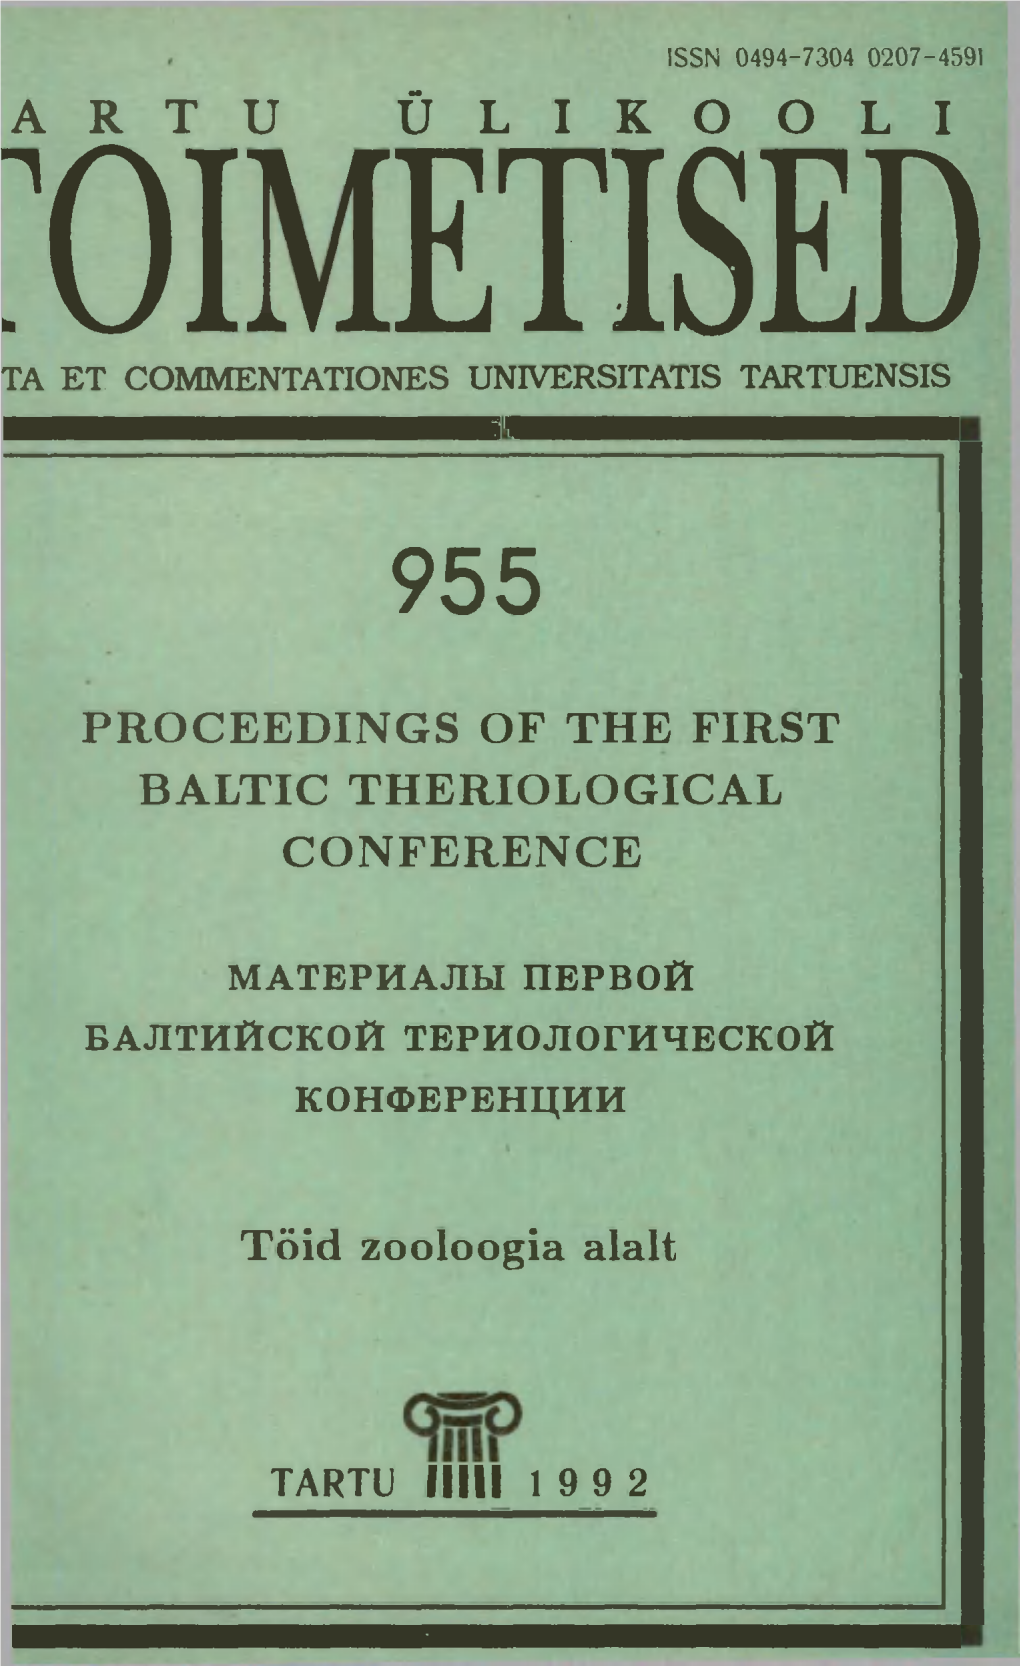 Proceedings of the First Baltic Theriological Conference